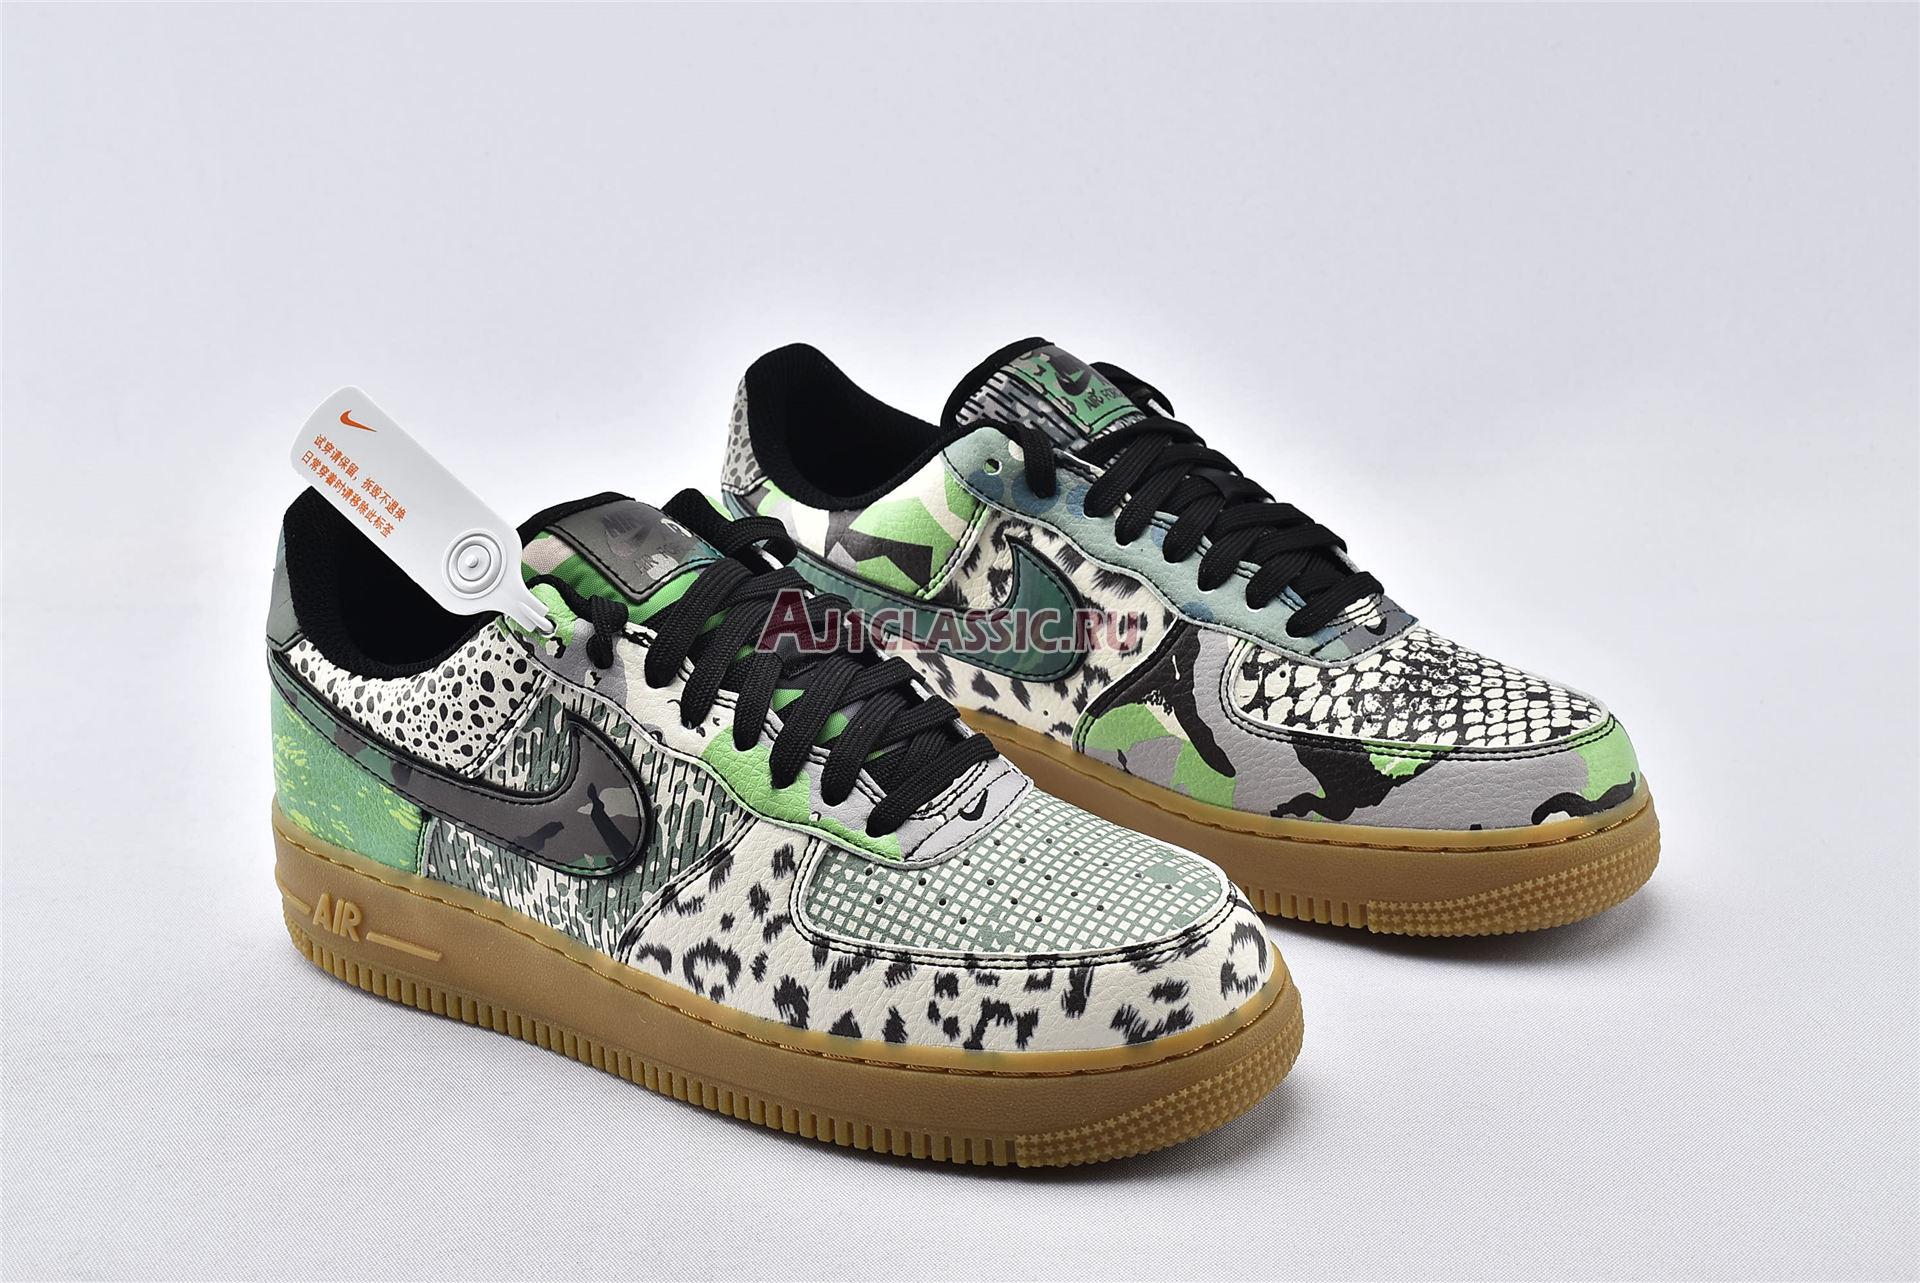 Nike Air Force 1 Low QS "Chicago" CT8441-002